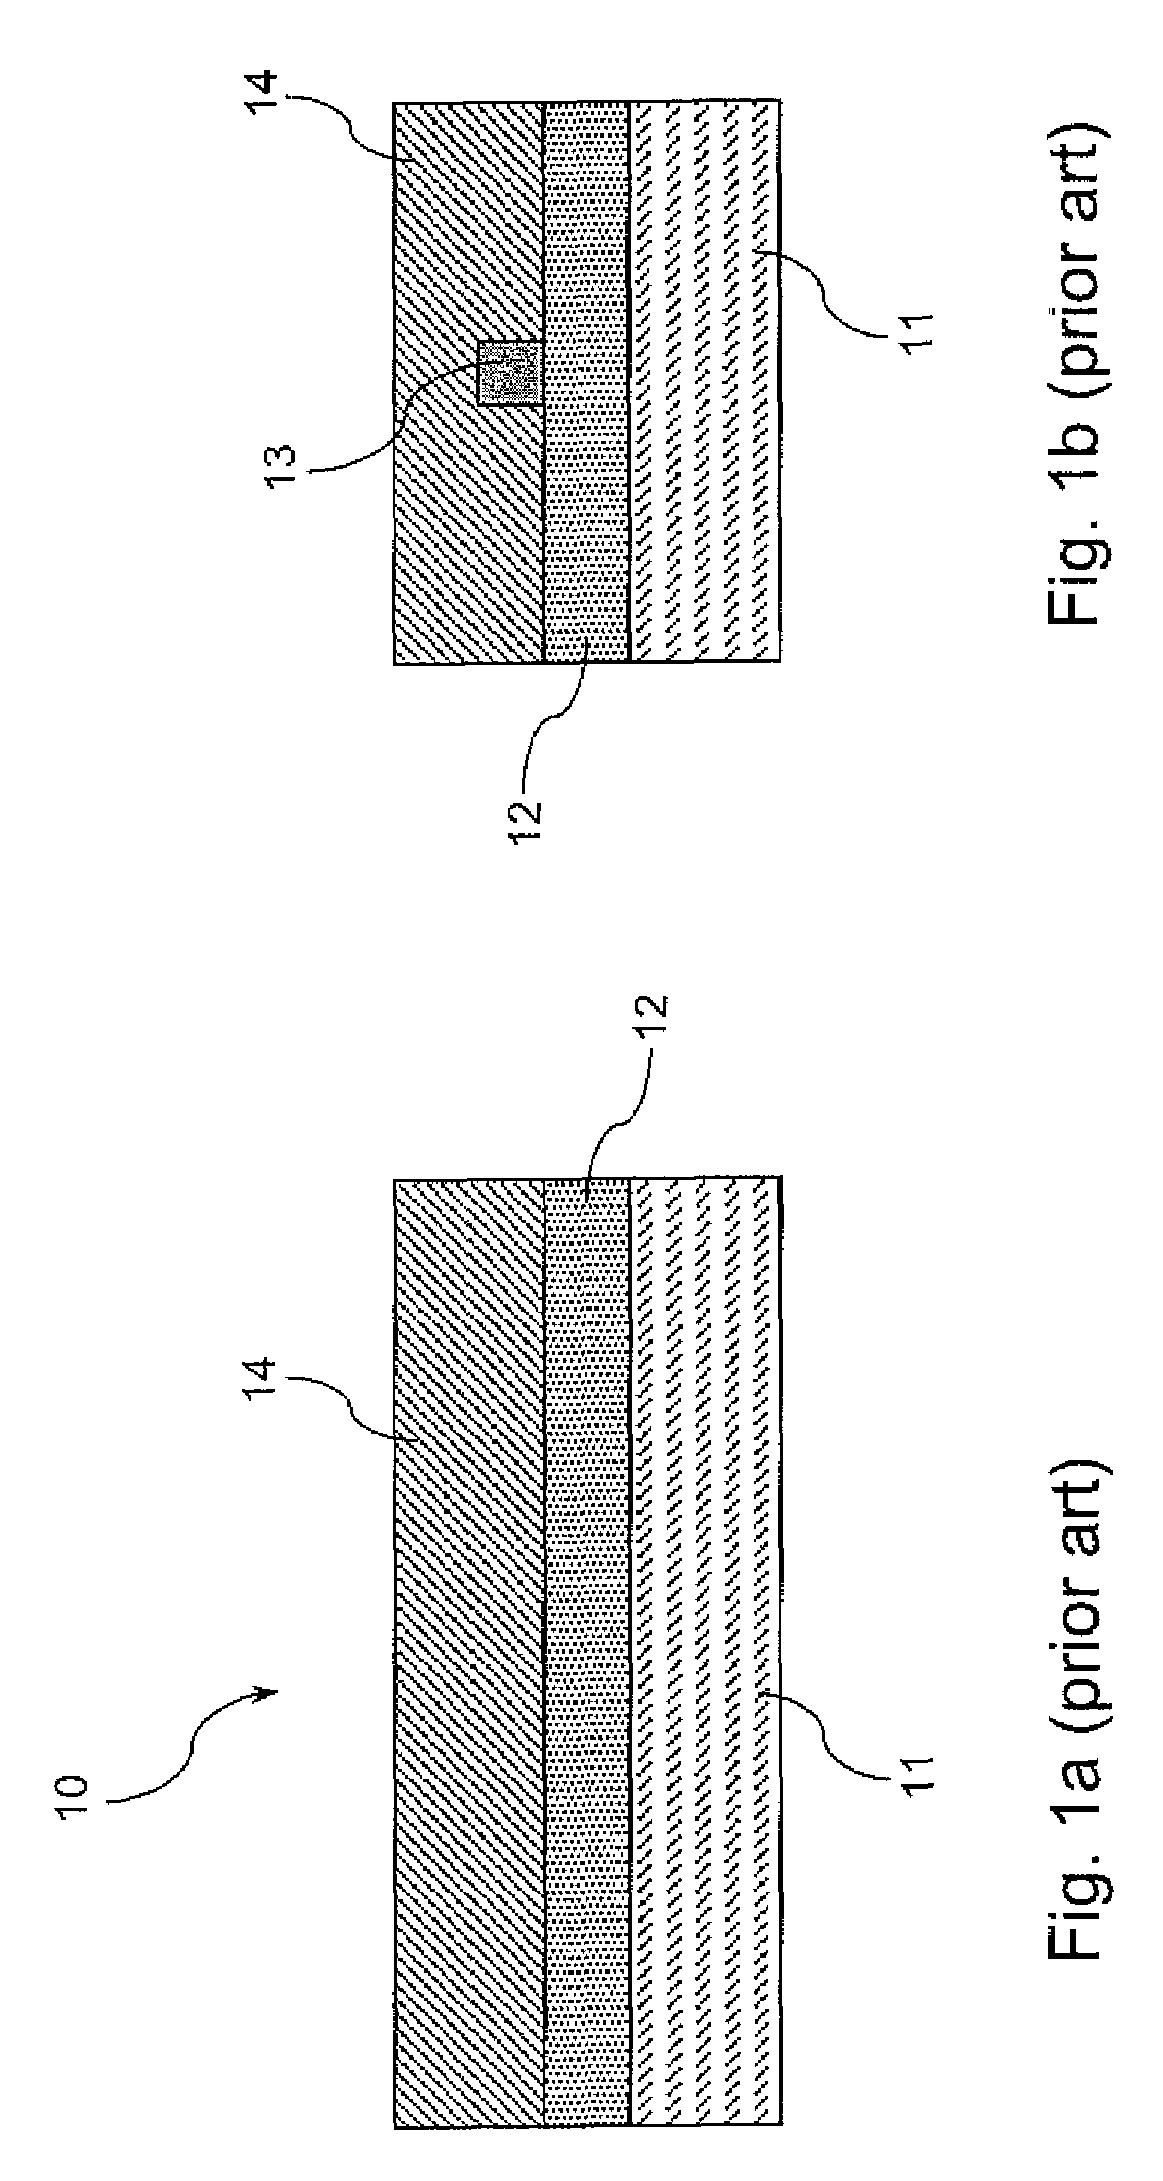 Methods for fabricating polymer optical waveguides on large area panels